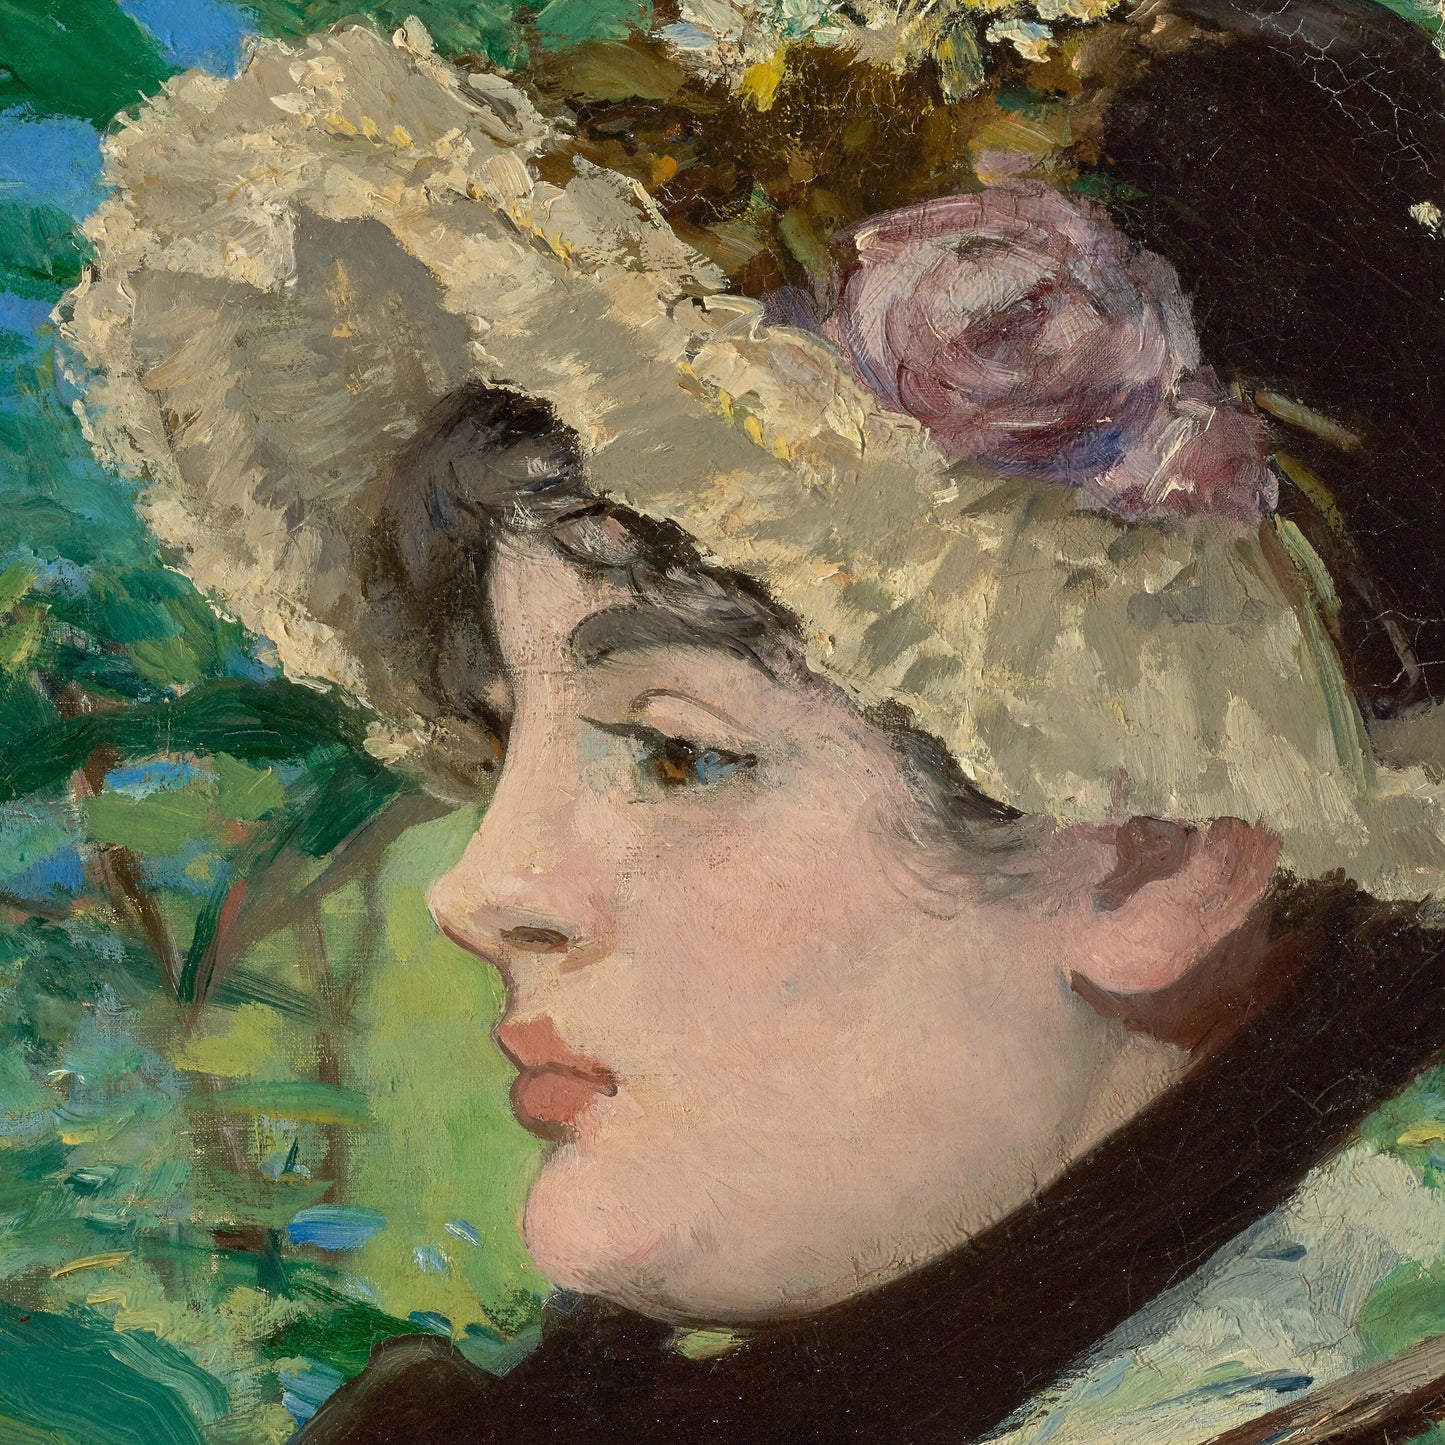 Jeanne (Spring) by Édouard Manet, 3d Printed with texture and brush strokes looks like original oil-painting, code:337